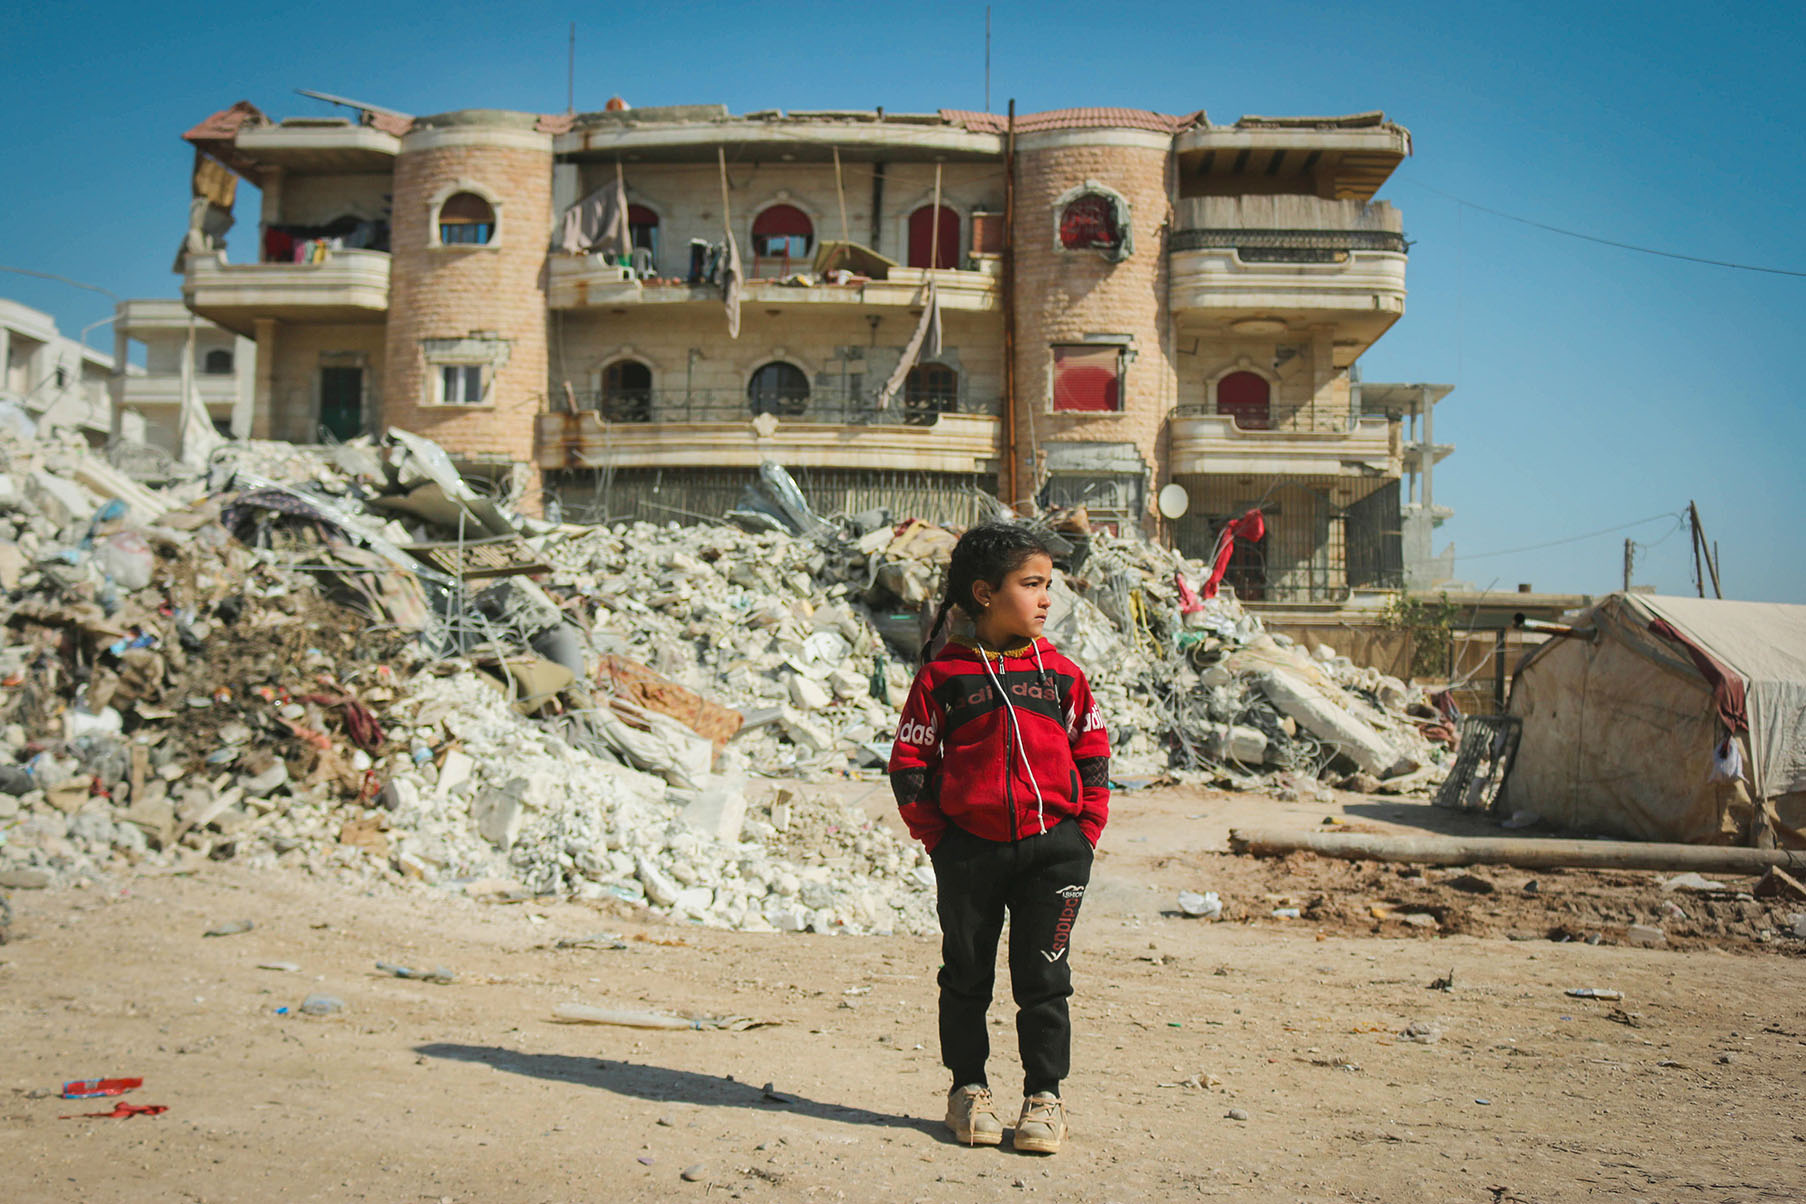 Young Moroccan girl stands in front of the rubble caused by a devastating earthquake in Morocco